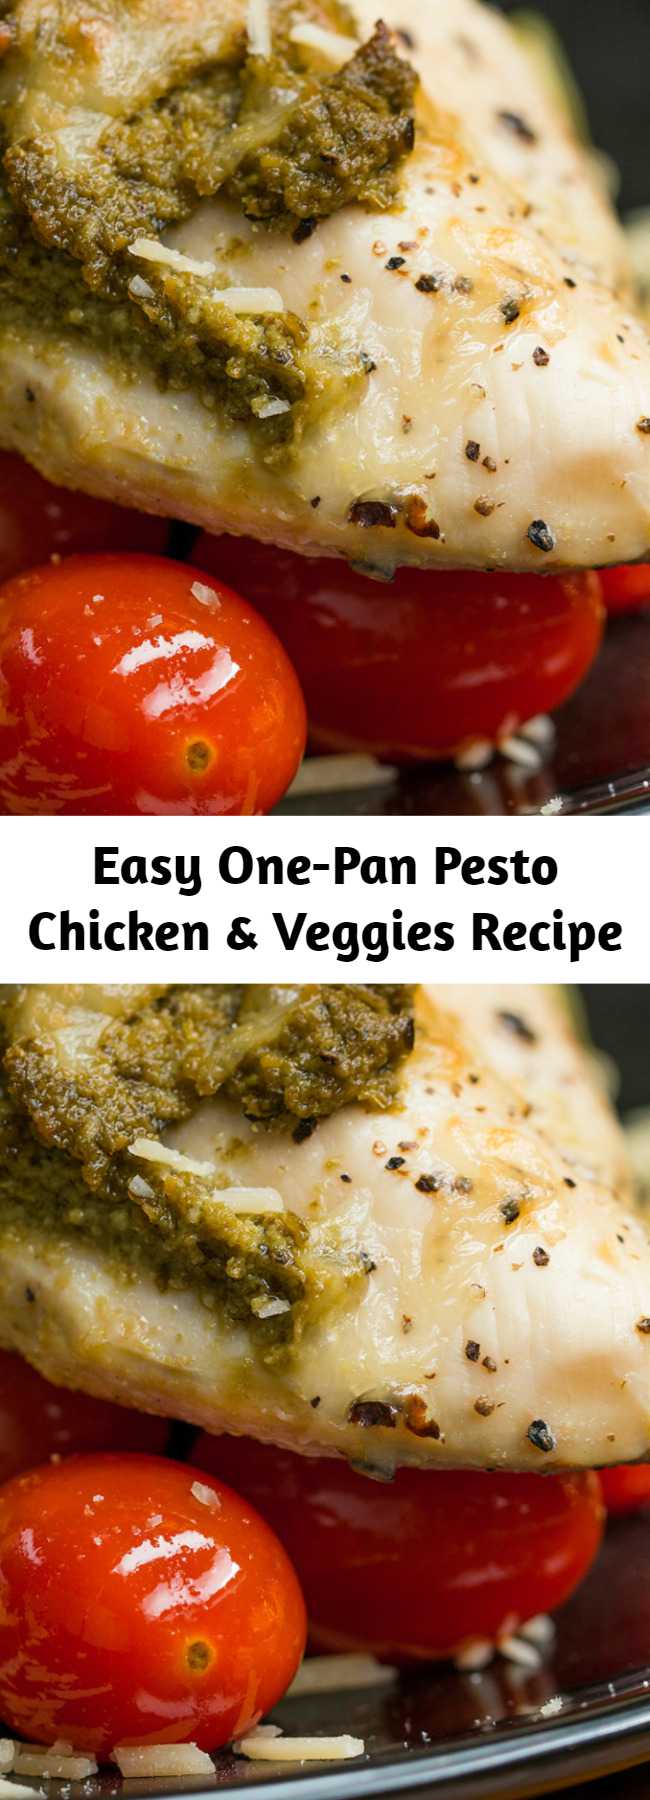 Easy One-Pan Pesto Chicken & Veggies Recipe - Here's a quick and easy dinner that is full of flavor!